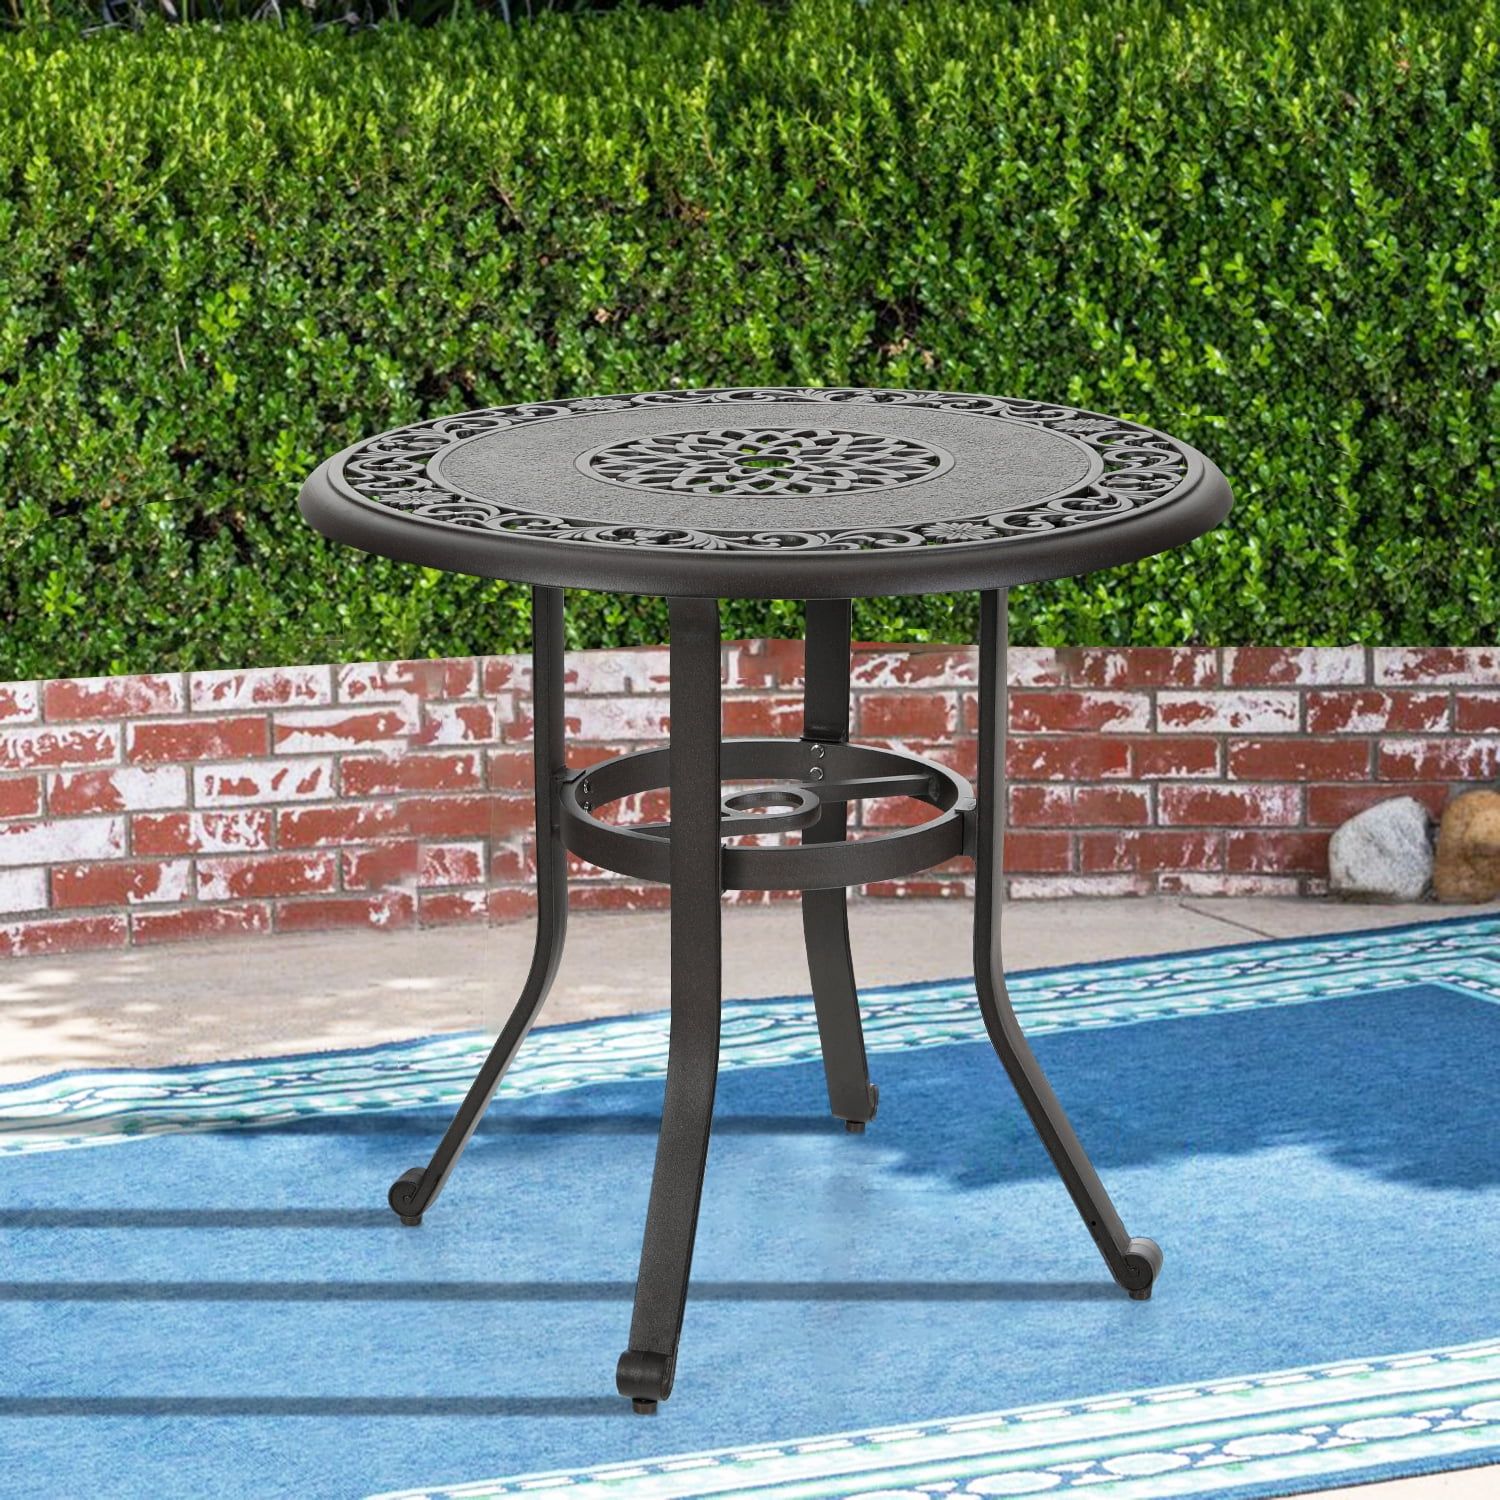 Mf Studio 32" Cast Aluminum Patio Outdoor Bistro Table, Round Dining With Regard To Outdoor Half Round Coffee Tables (View 4 of 20)